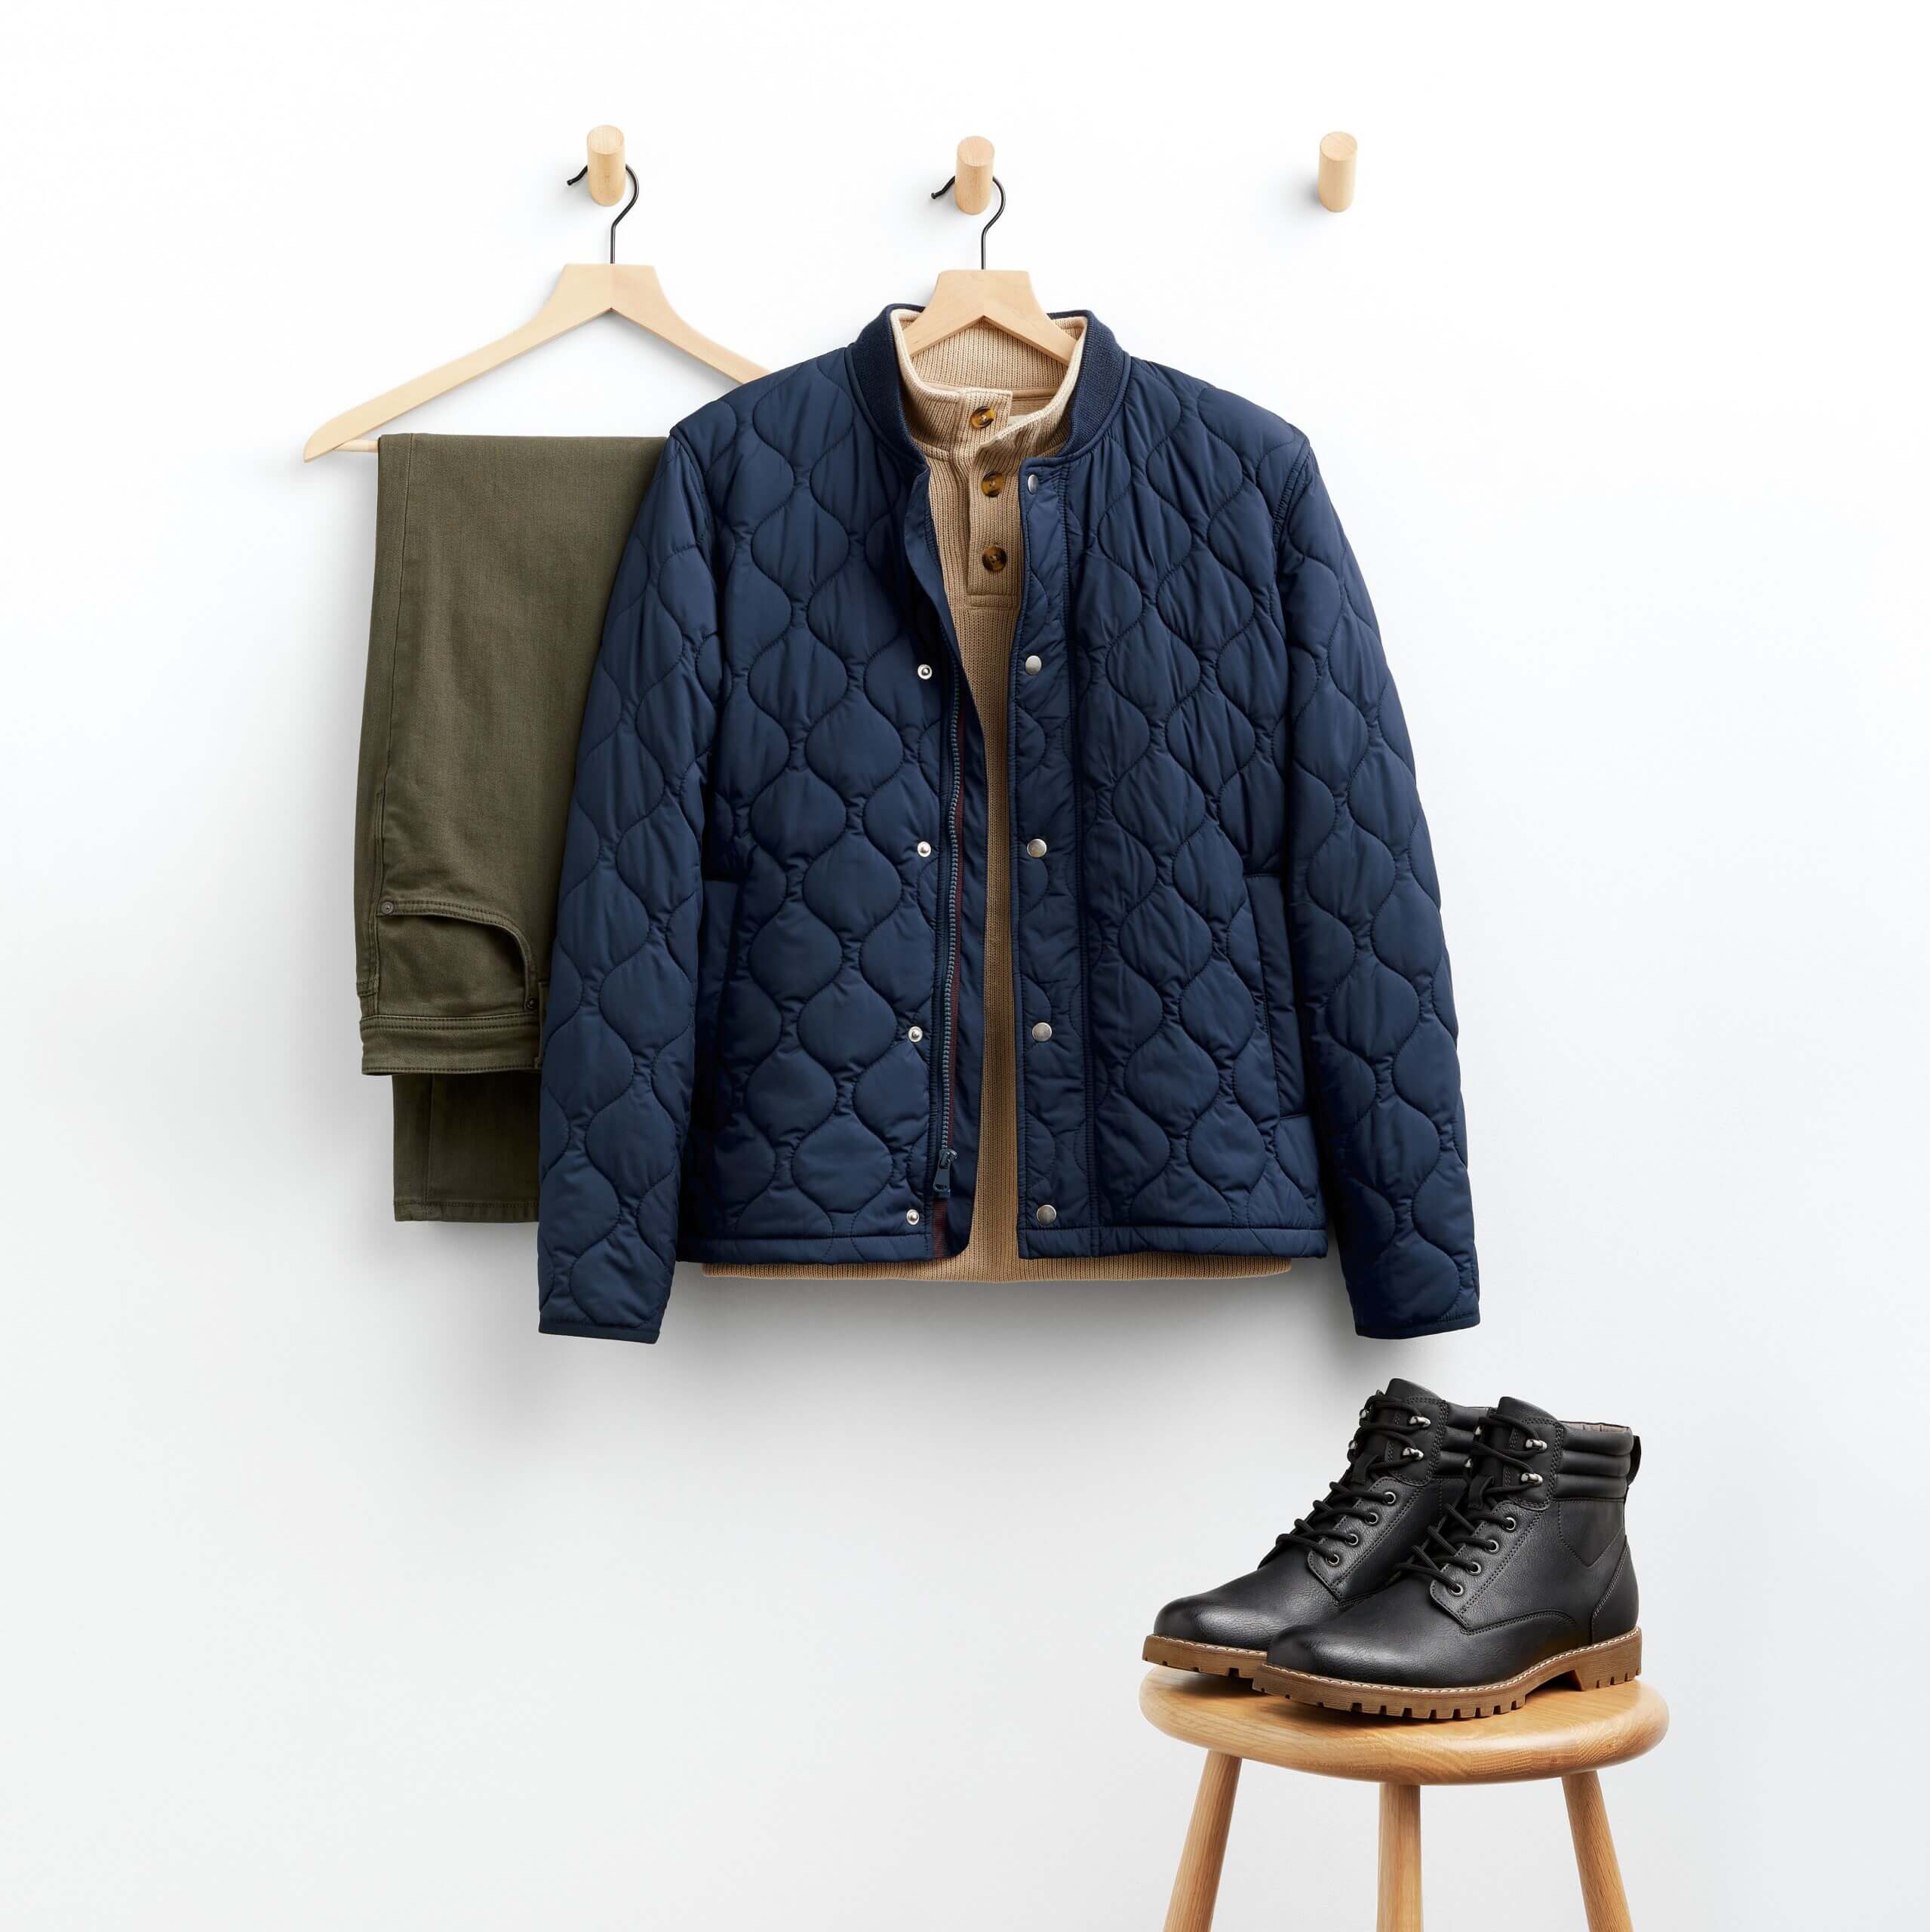 6 Outfits With a Black Quilted Vest + 6 Quilted Vest Options